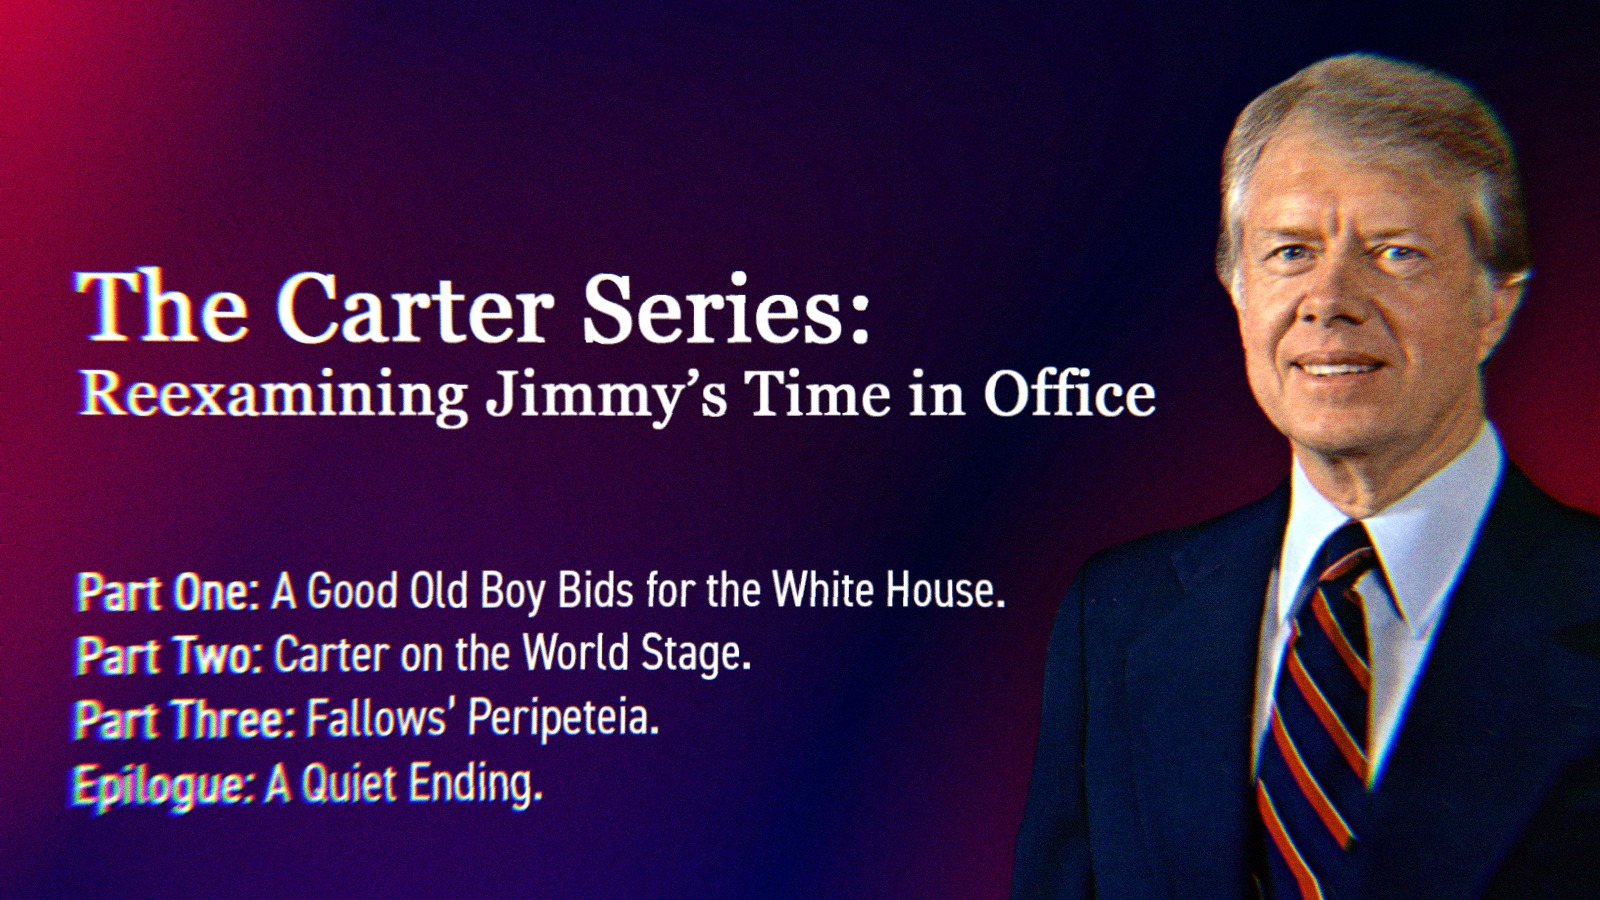 A photo of Jimmy Carter alongside text that says The Carter Series- Reexamining Jimmy’s Time in Office. Part One- A Good Old Boy Bids for the White House. Part Two- Carter on the World Stage. Part Three- Fallows’ Peripeteia. Epilogue- A Quiet Ending.